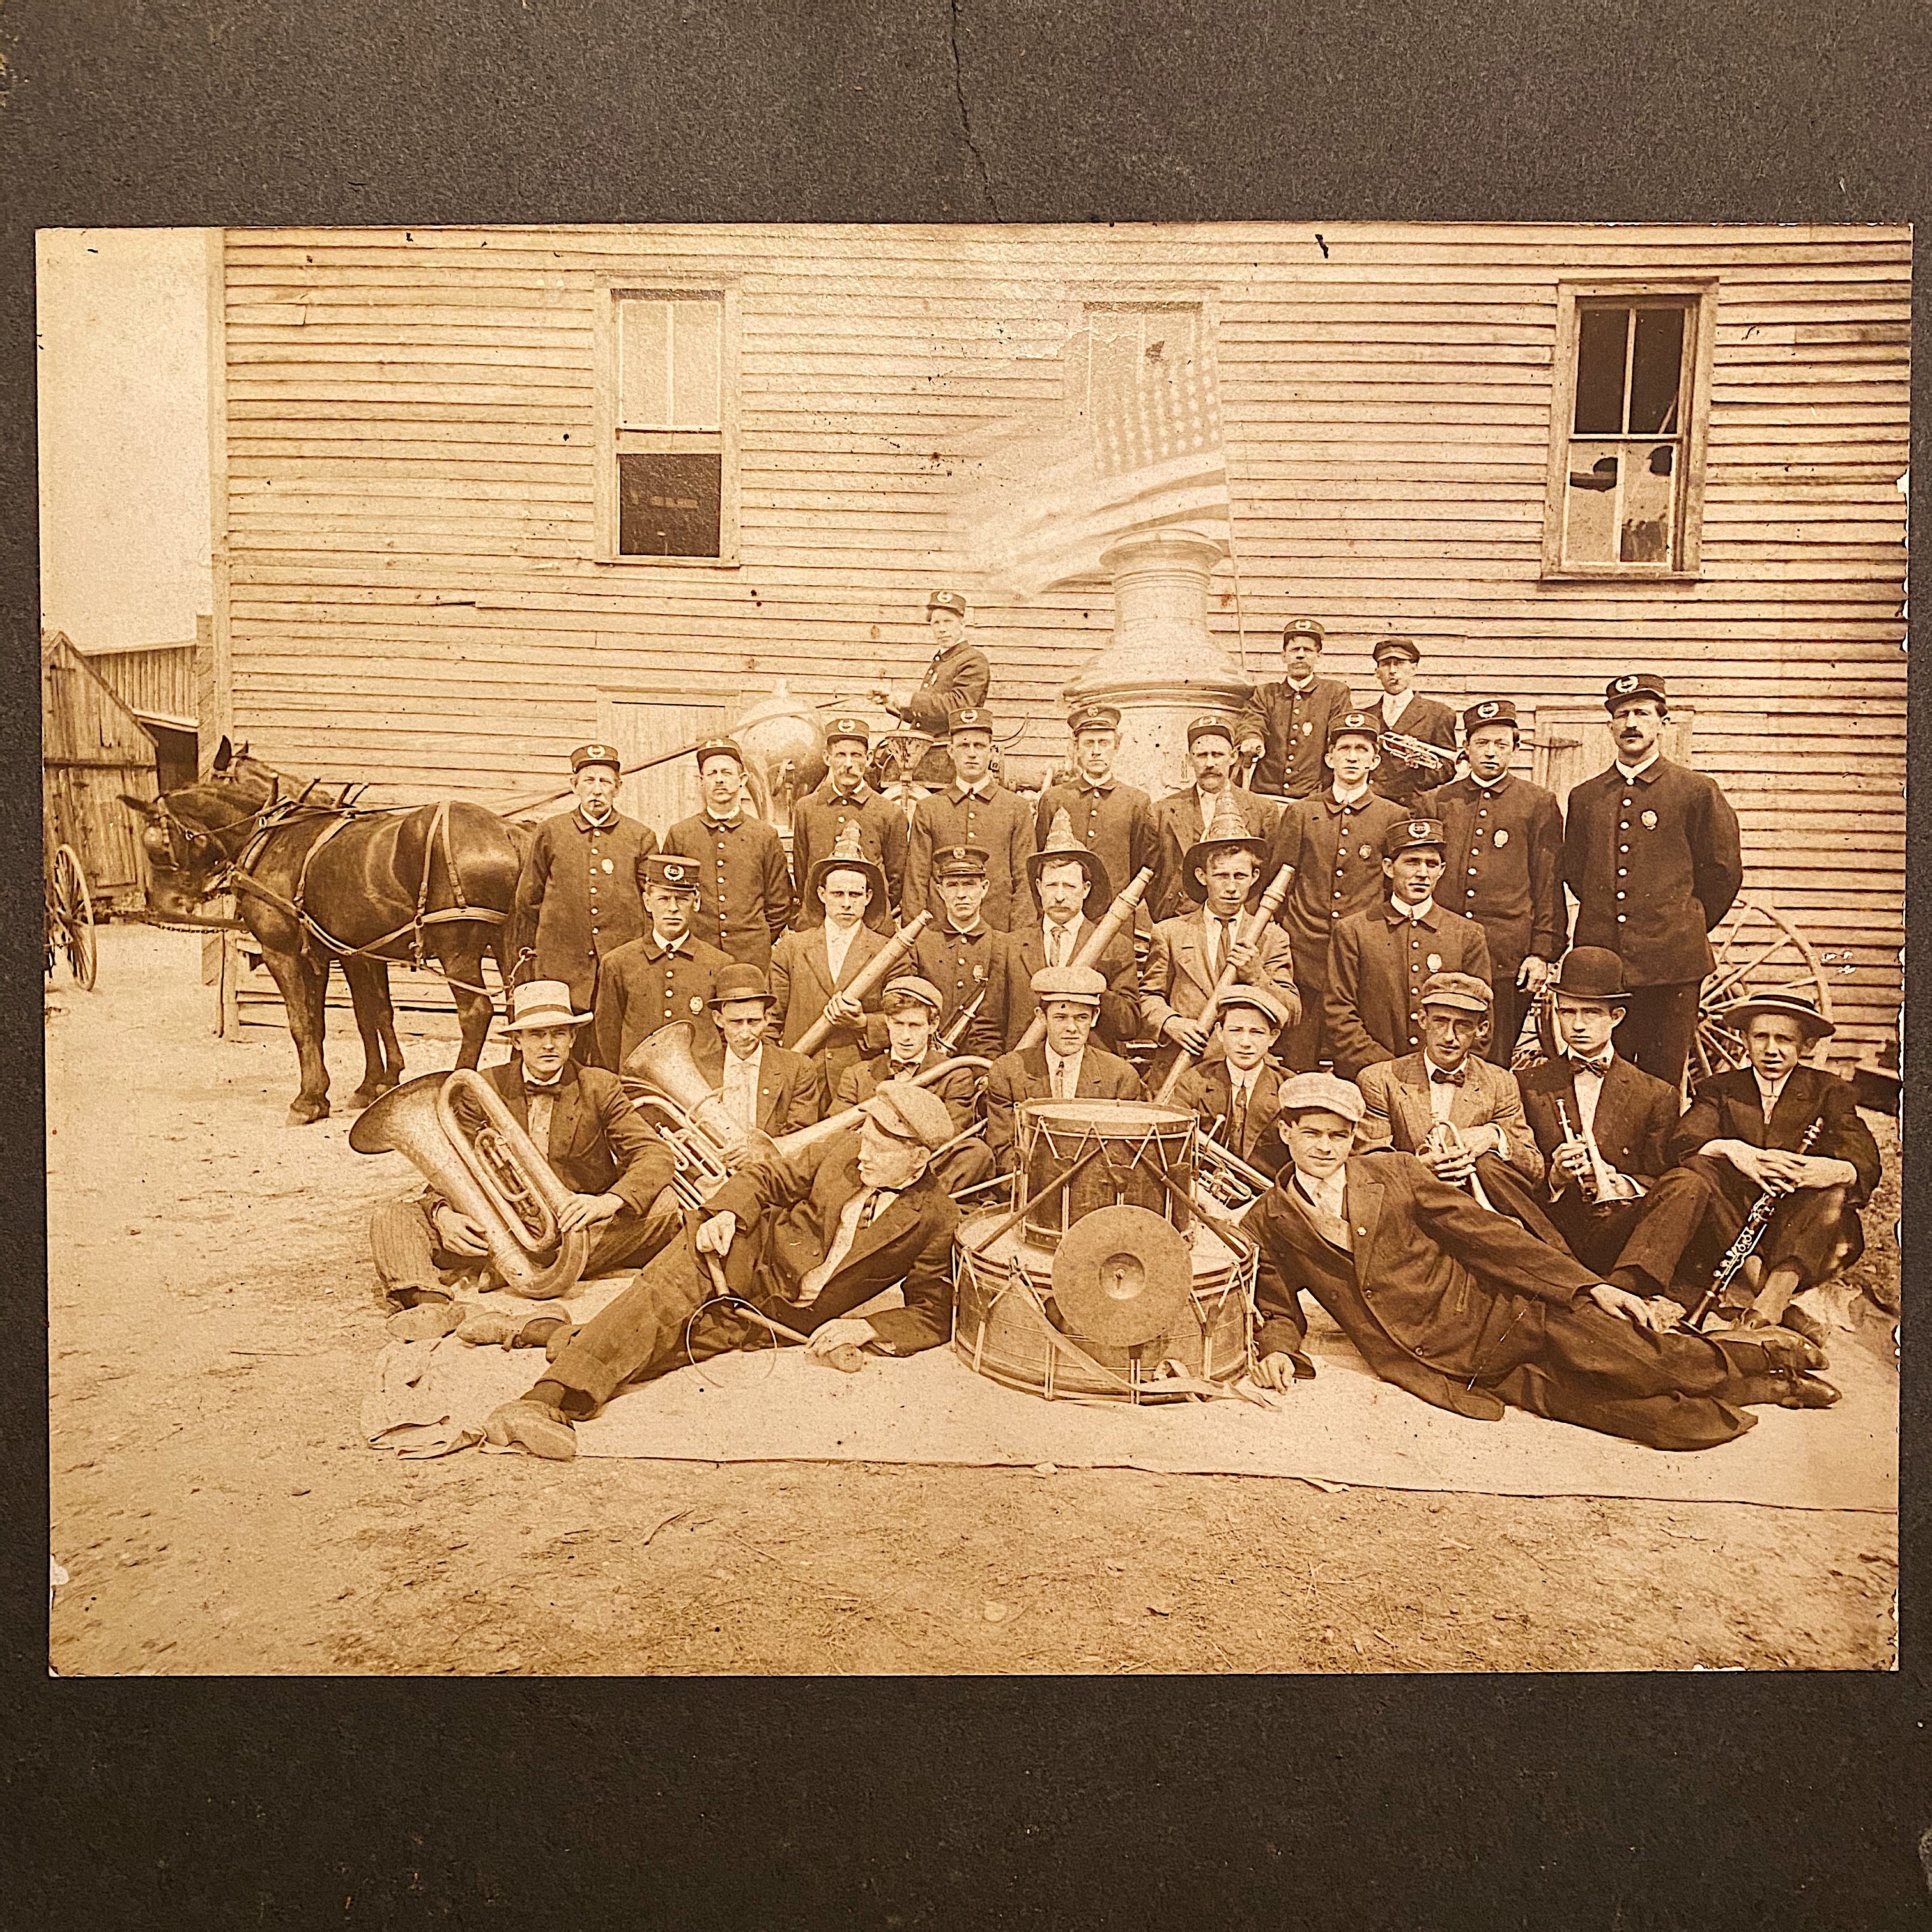 Antique Firemen Photograph - Early 1900s Firefighters Posing with Flag - Horse Drawn Fire Engine - Unusual Old Photography - Rare Image Cool 